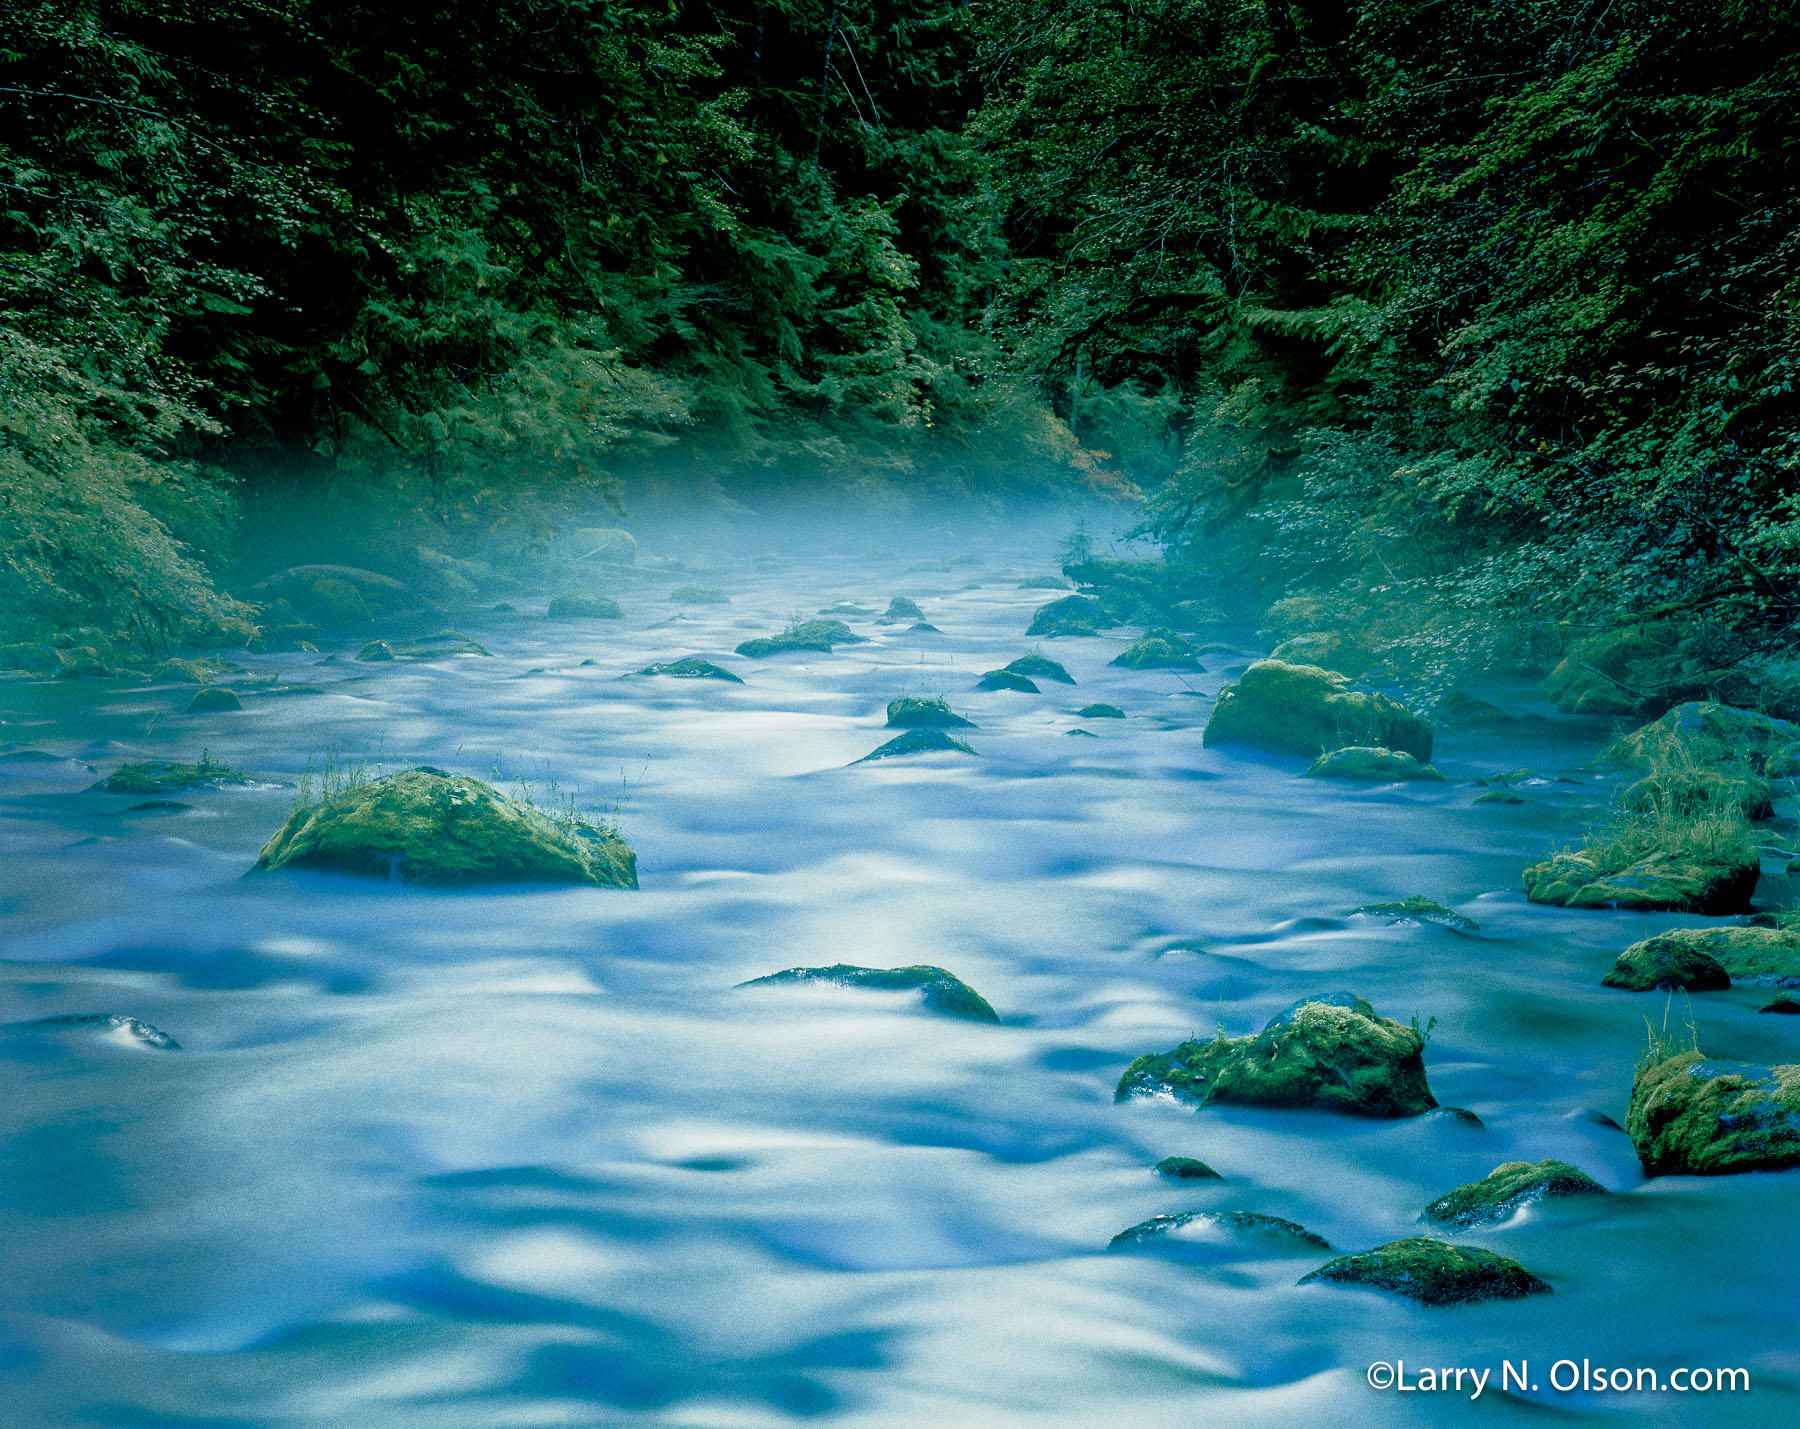 McKenzie River. OR | Twilight colors the water in the river and old growth forest.